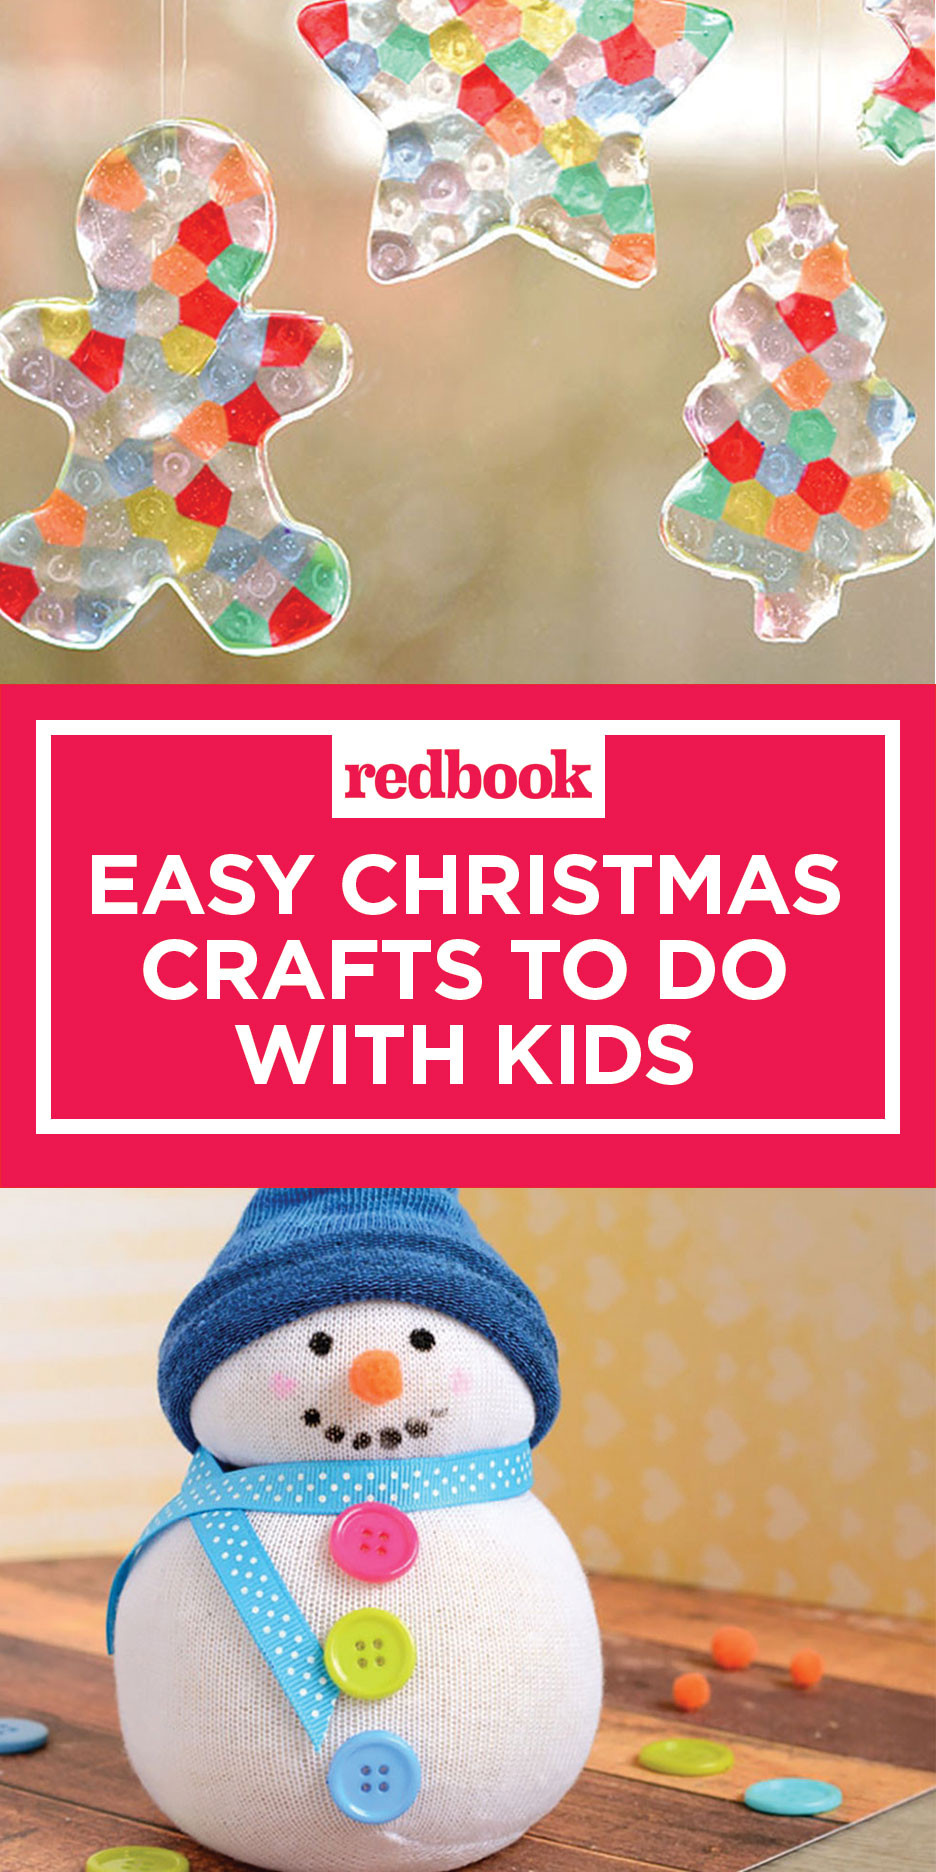 Christmas Arts And Craft Ideas For Toddlers
 Easy Christmas Crafts for Kids Holiday Arts and Crafts